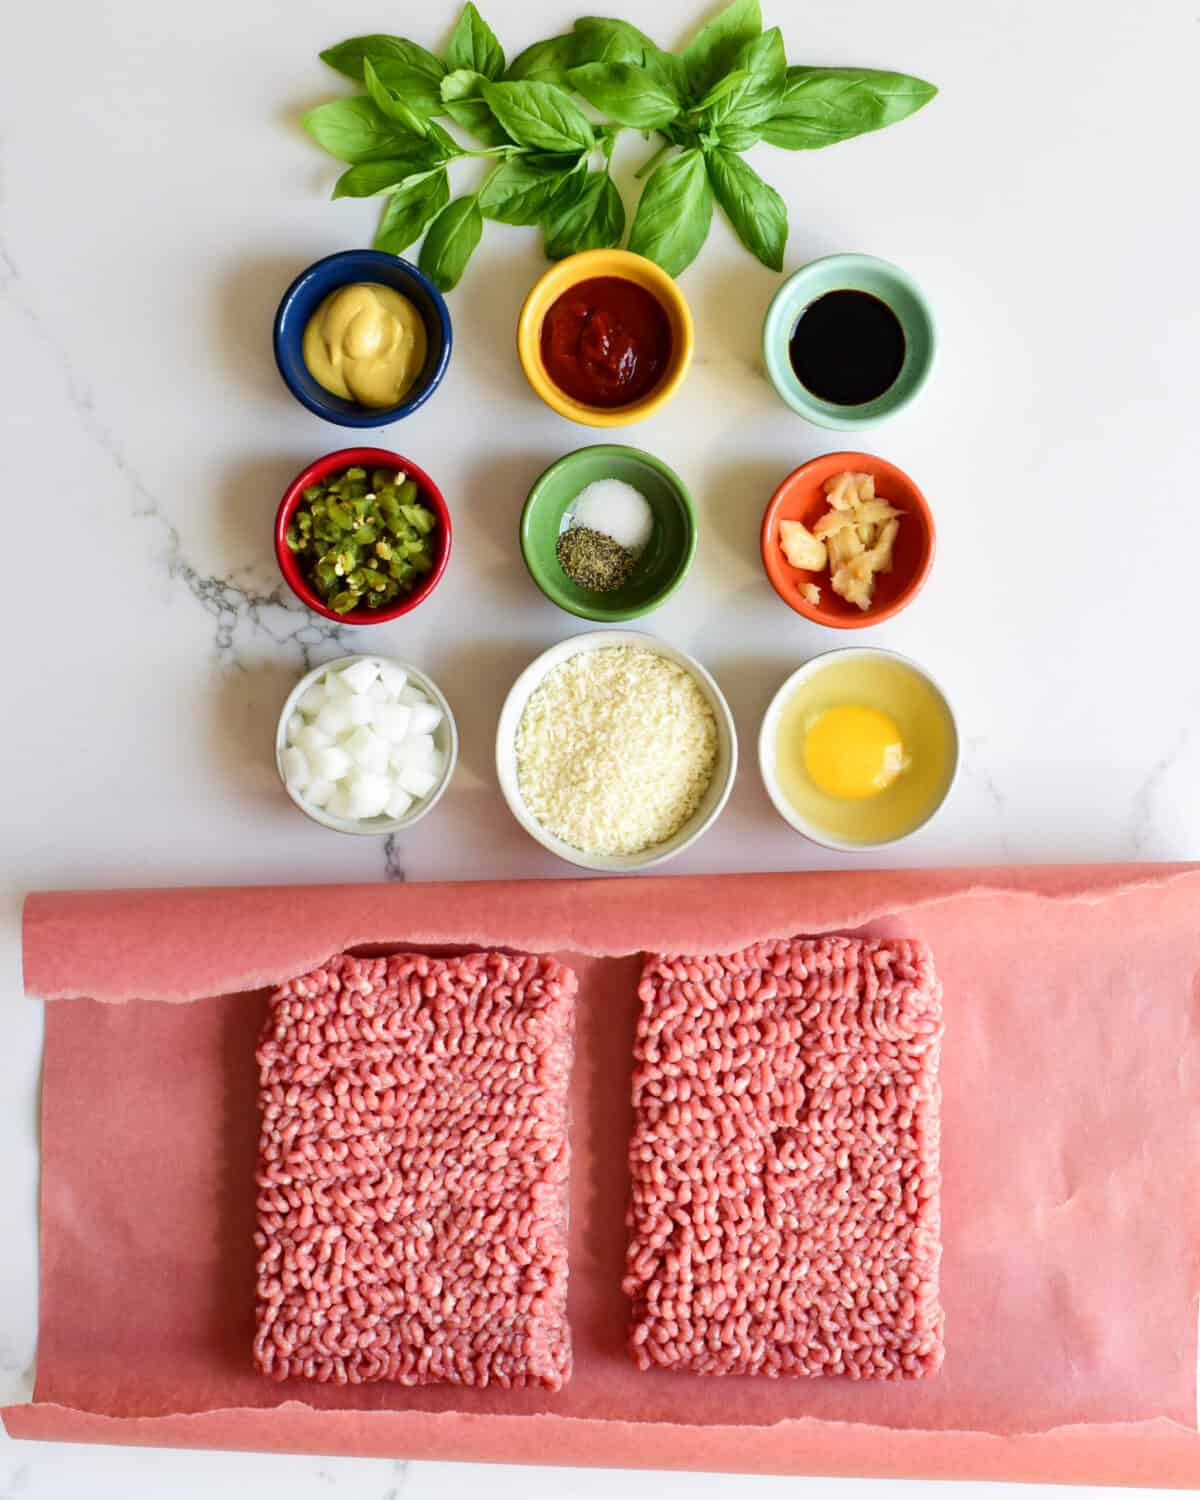 A top down view of ingredients for a Bahn Mi inspired pork burger which include nined small bowls of dry and wet ingredients and fresh ground pork.